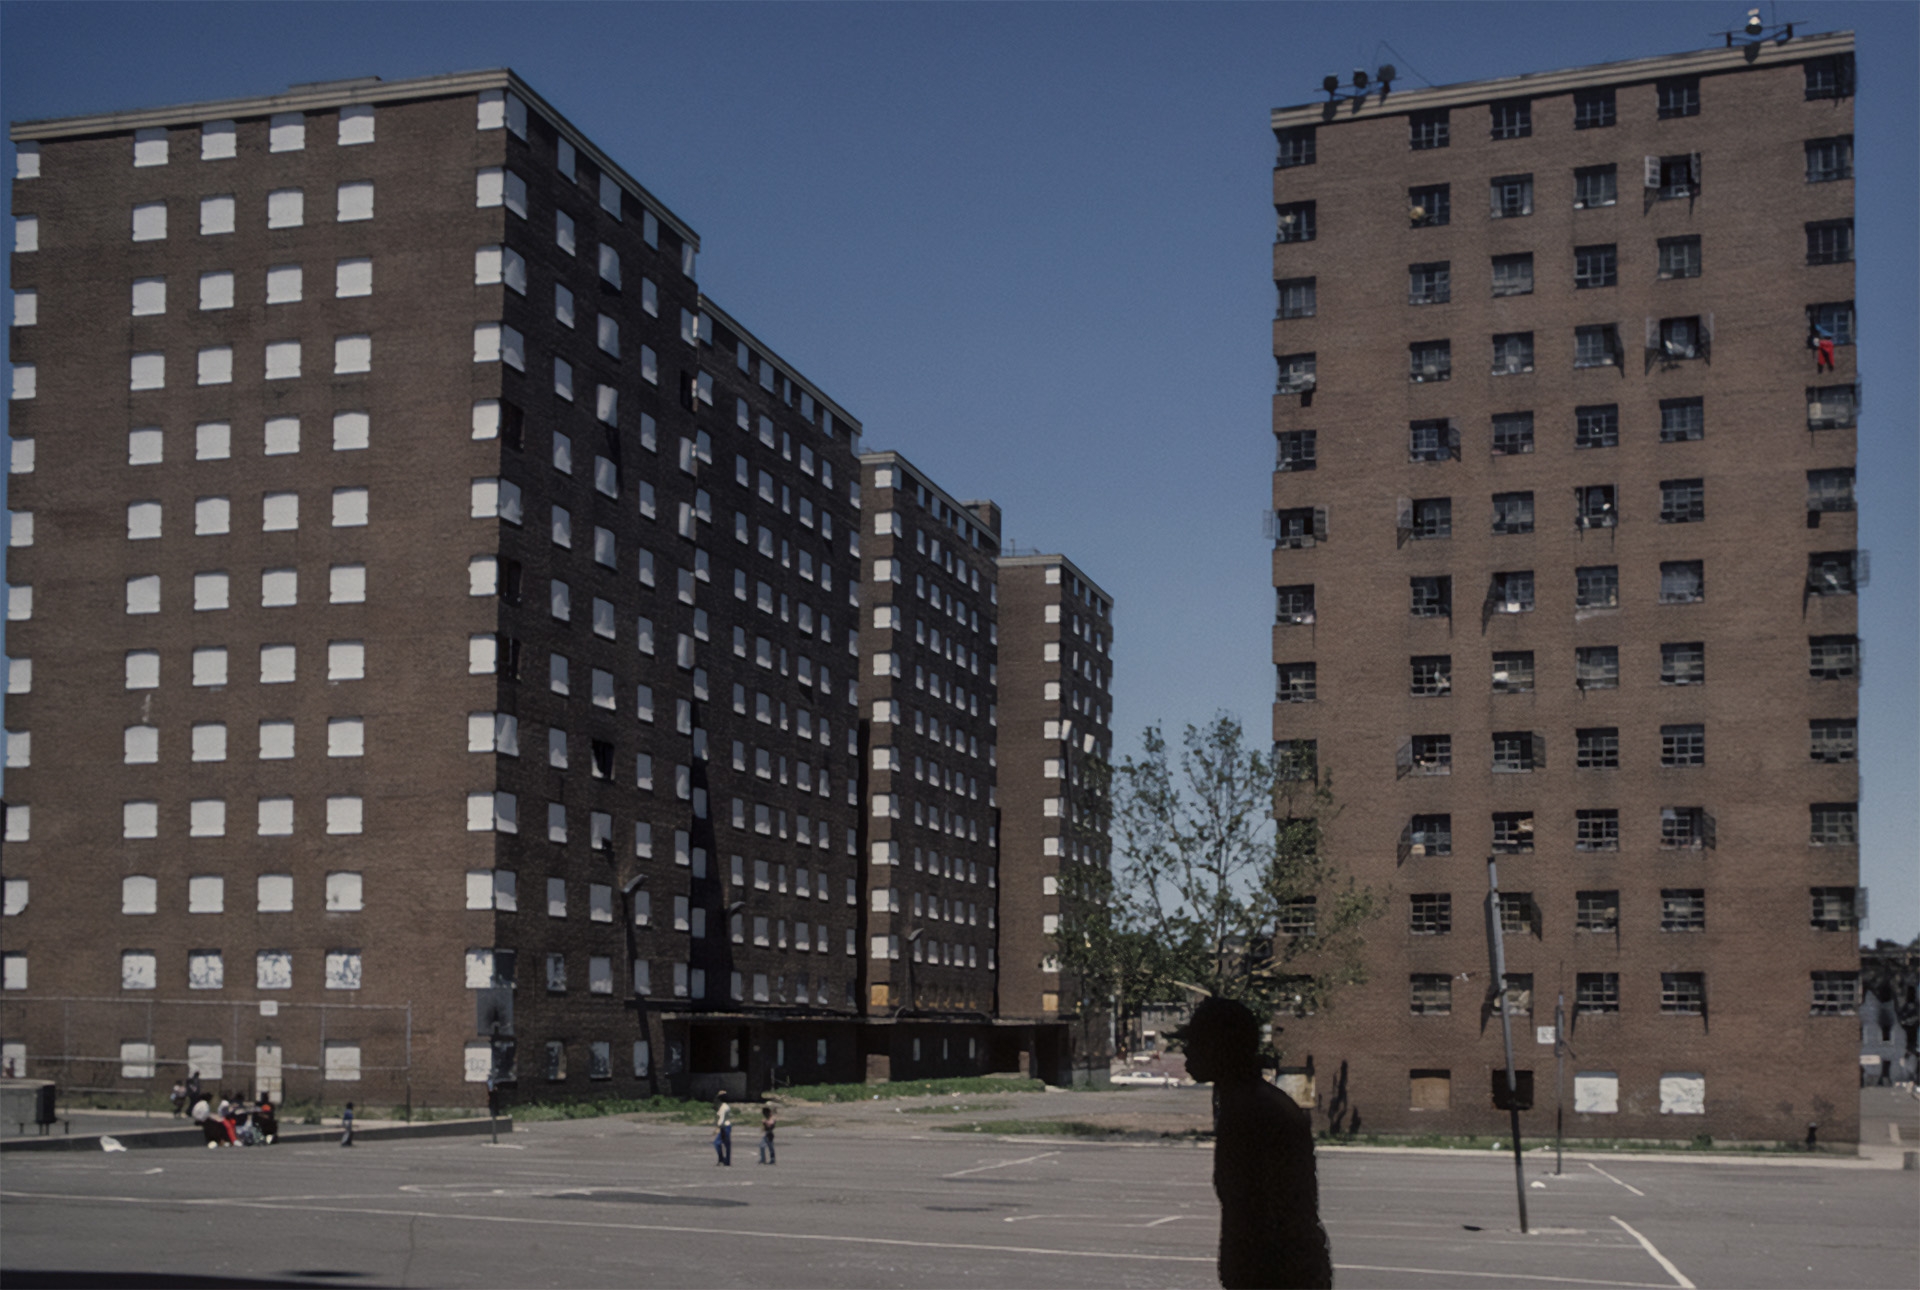 View of Columbus Homes, a public housing project in Newark, New Jersey in 1980.